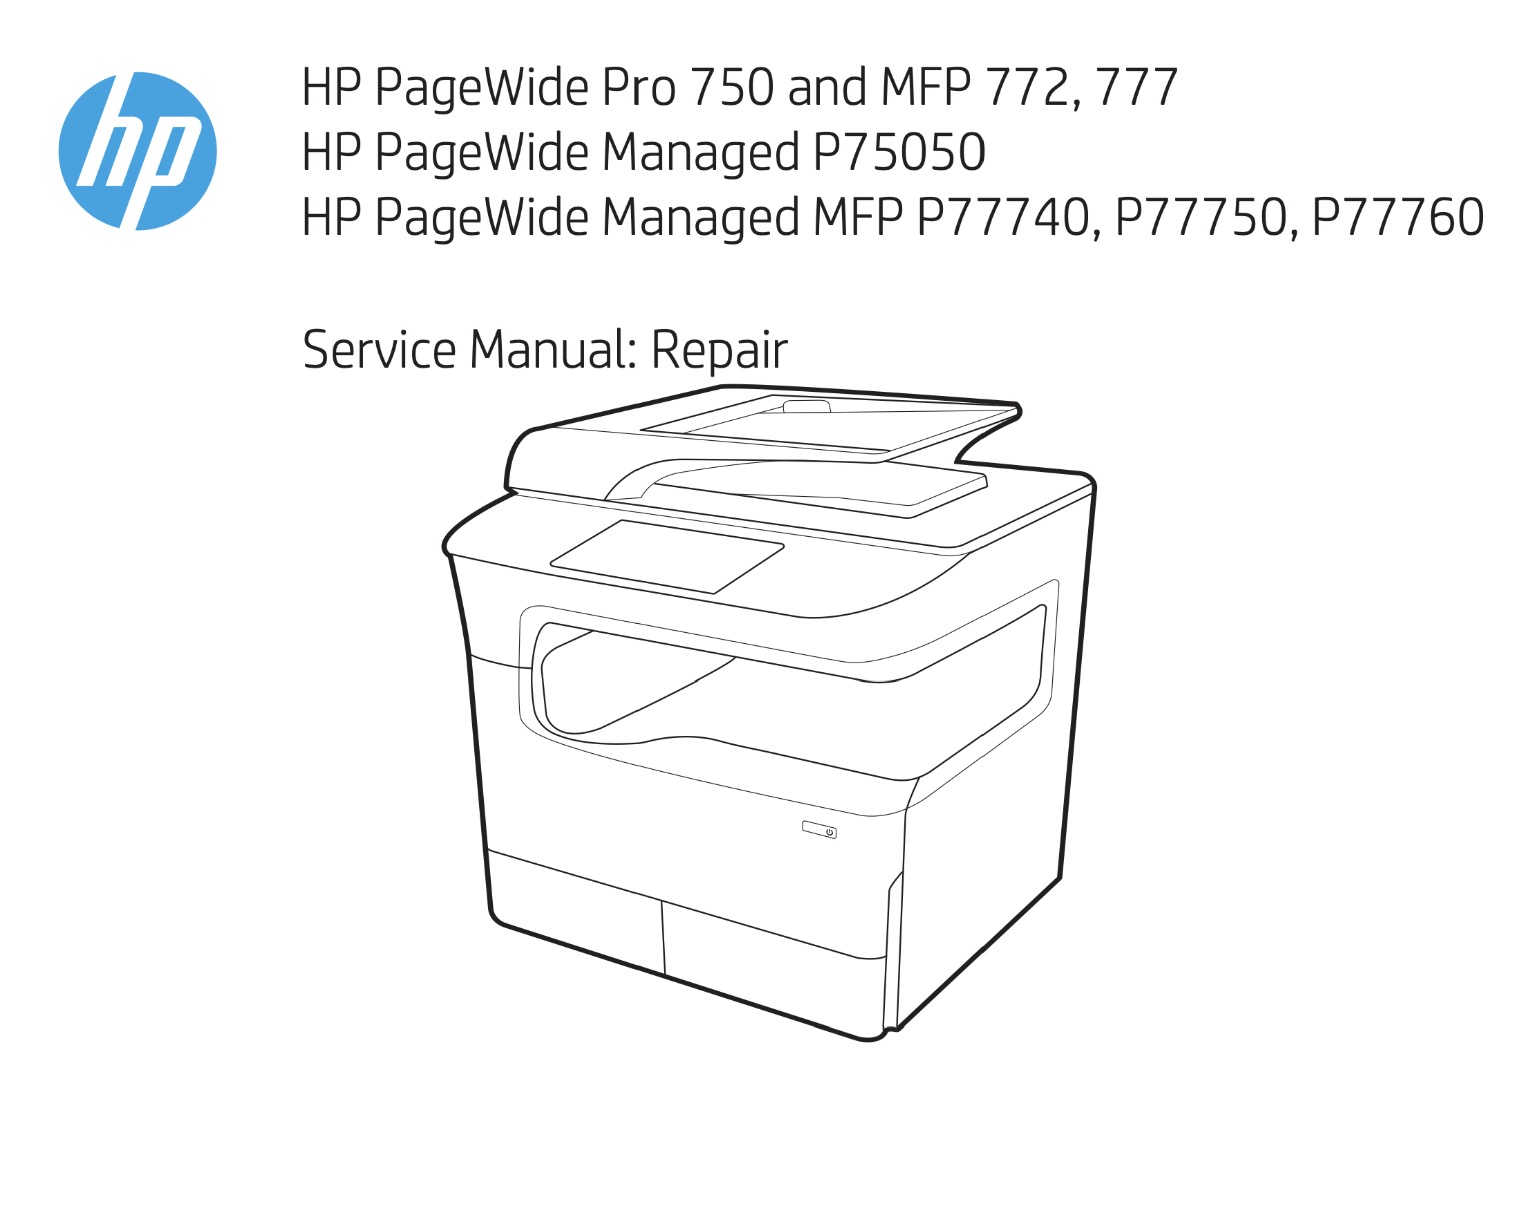 HP PageWide Pro 750, MFP 772, 777, Managed P75050,  MFP P77740, P77750, P77760 Service Repair Manual,  Parts List and Diagrams